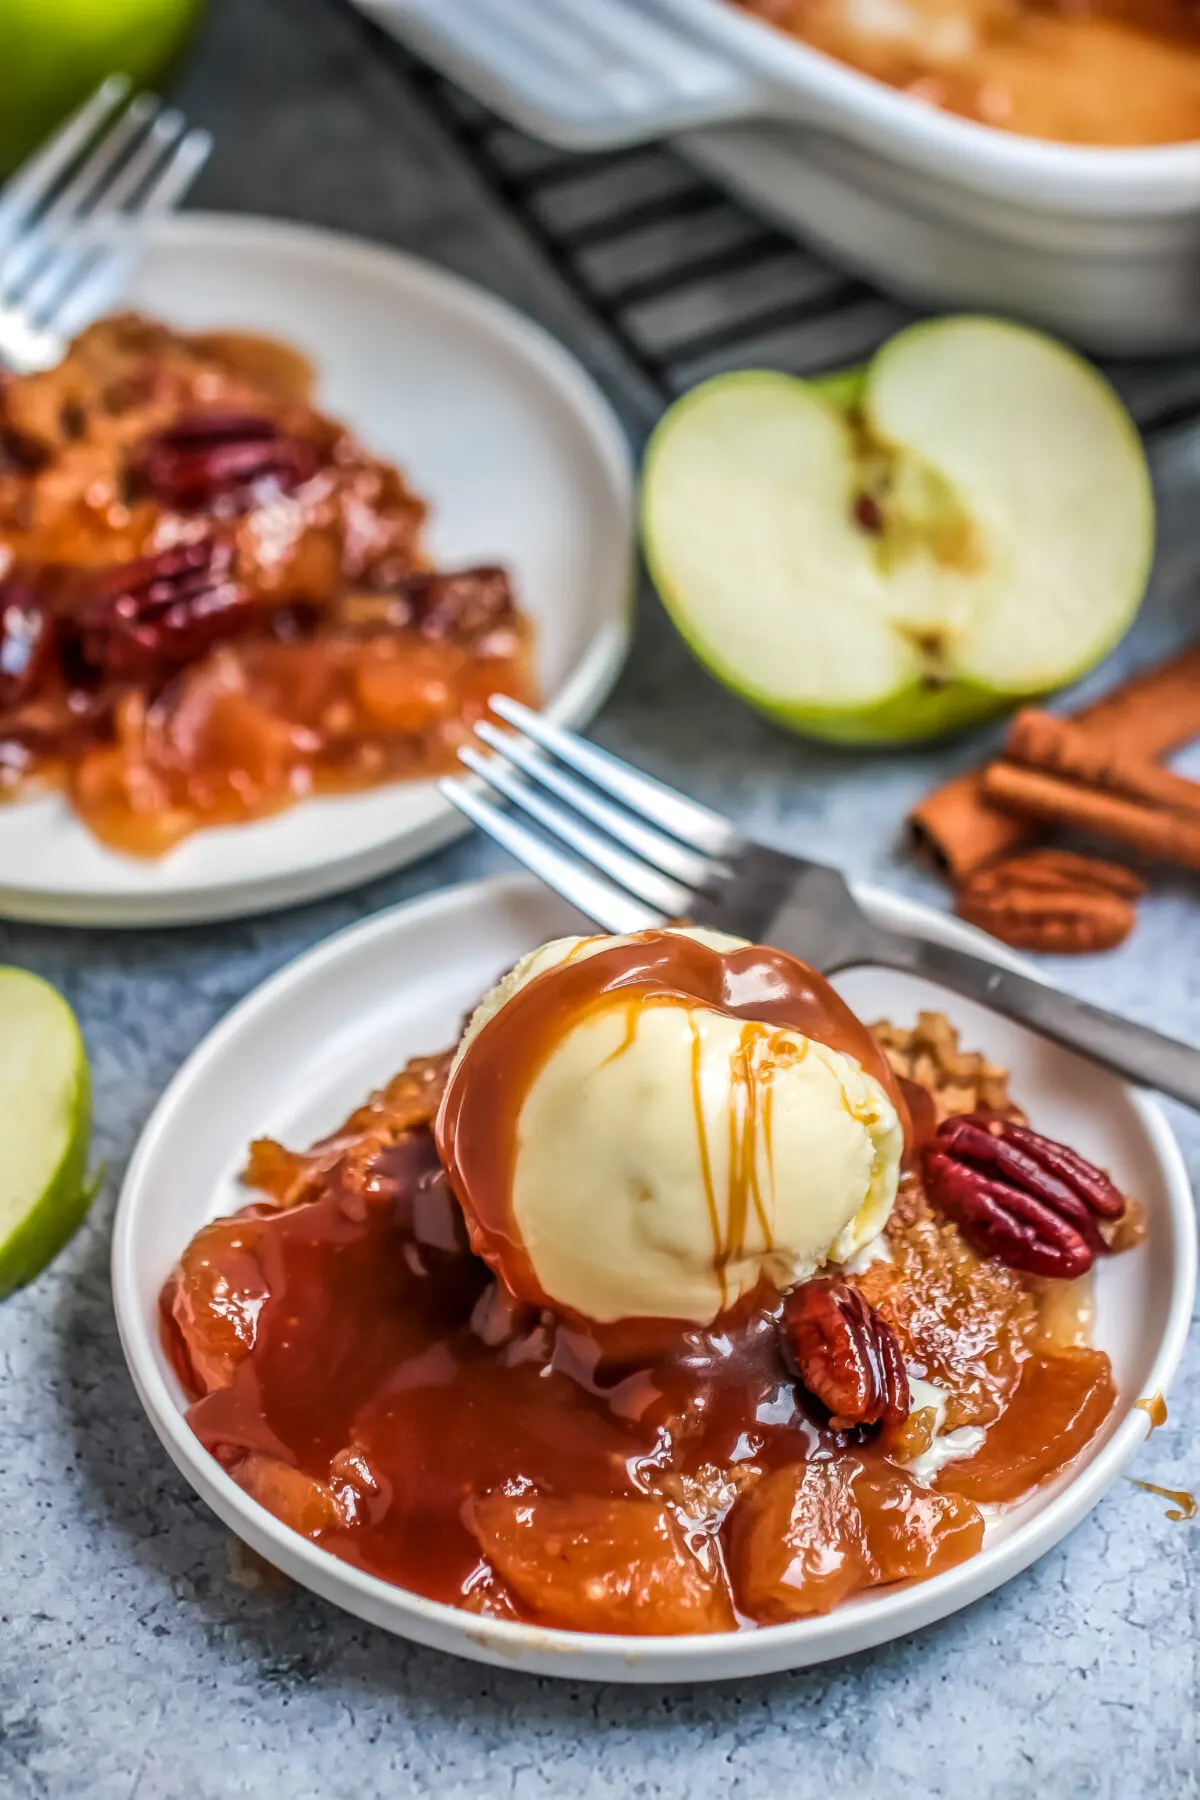 A delicious apple dump cake recipe that is easy to prepare and makes a great fall dessert served warm with ice cream and caramel sauce!